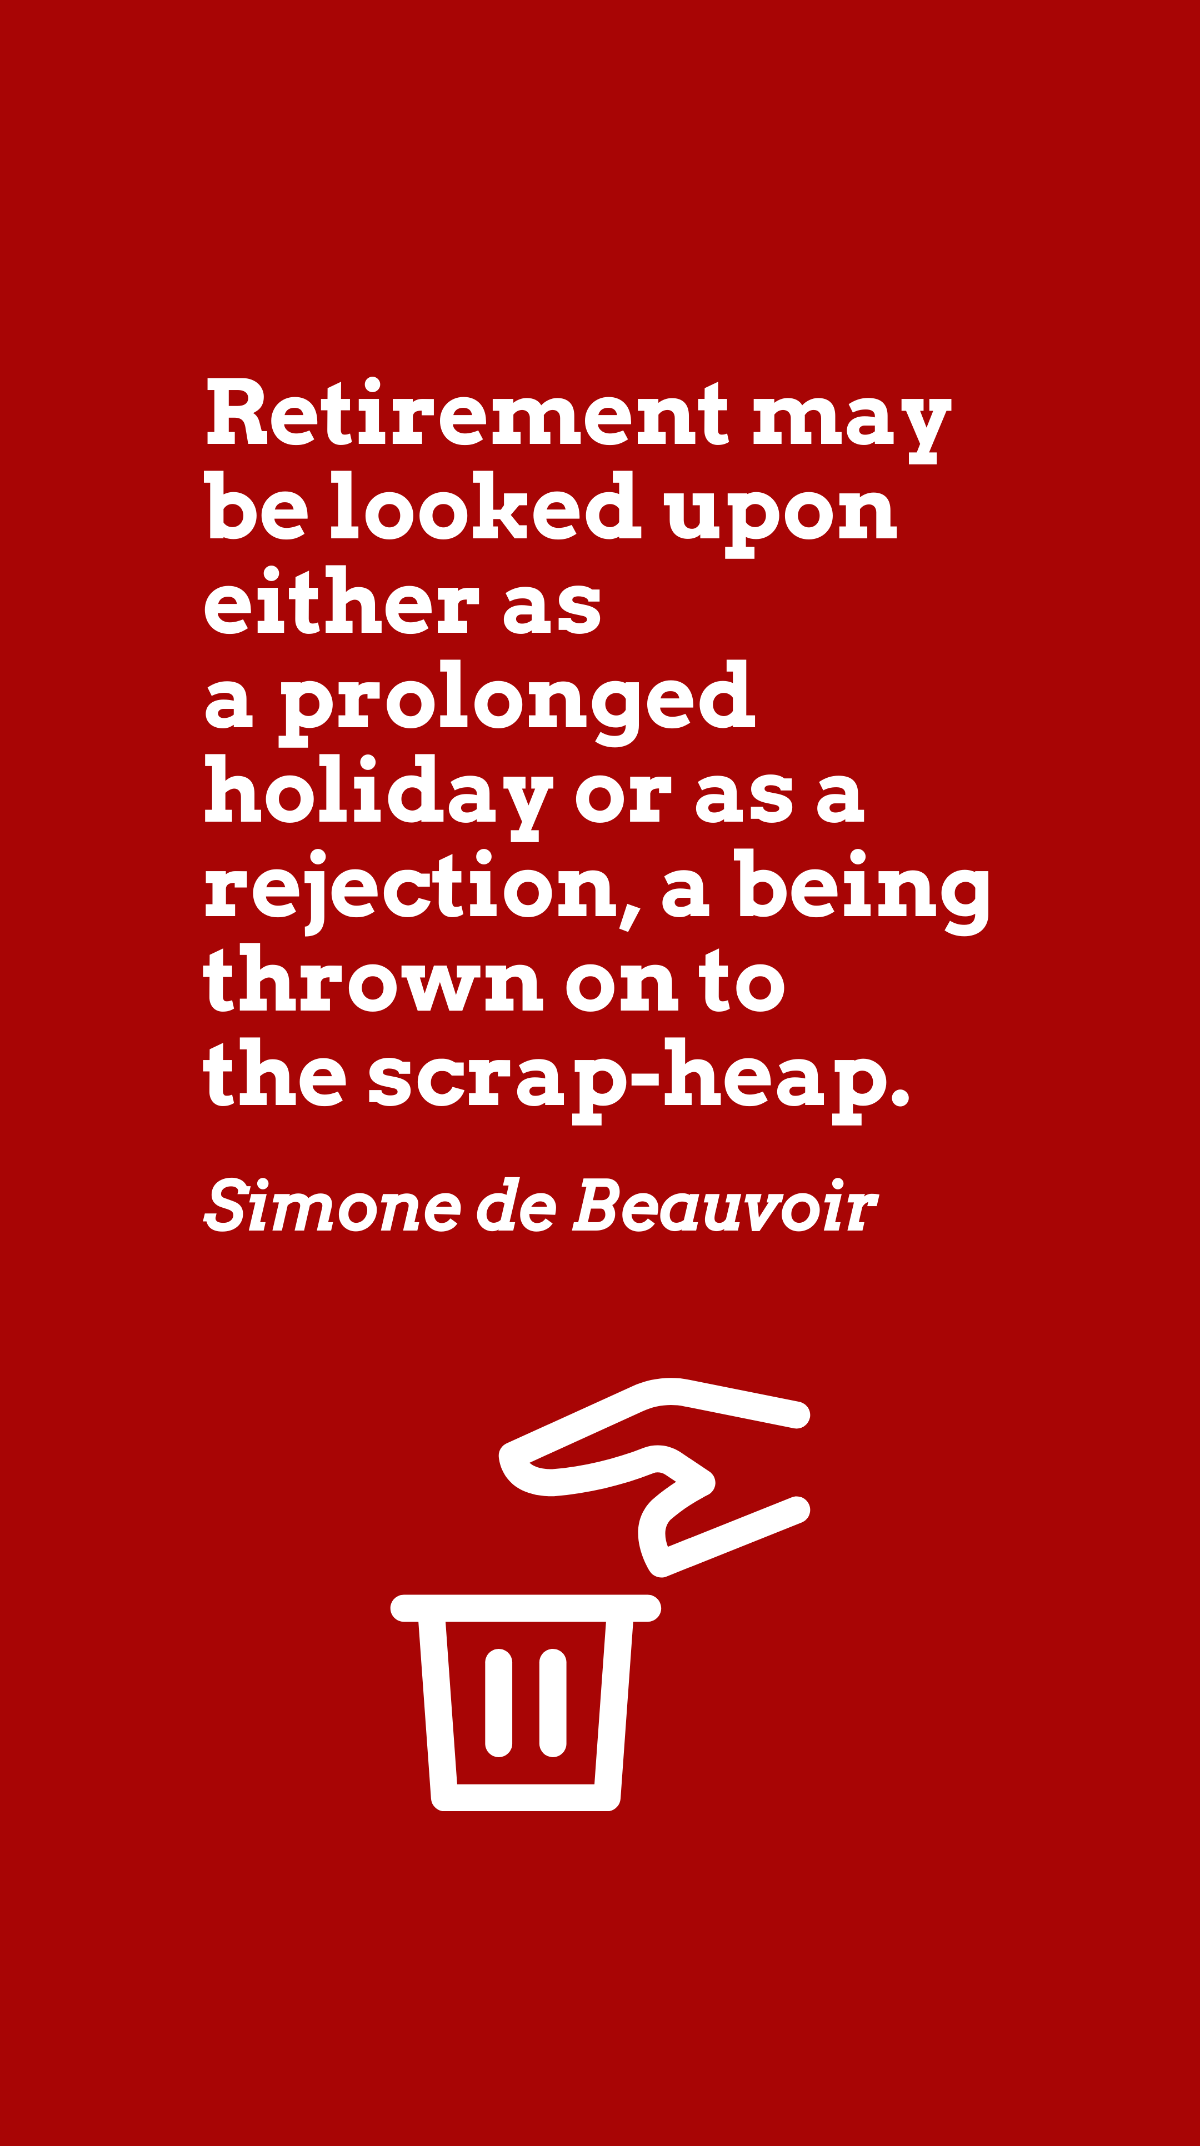 Free Simone de Beauvoir - Retirement may be looked upon either as a prolonged holiday or as a rejection, a being thrown on to the scrap-heap. Template